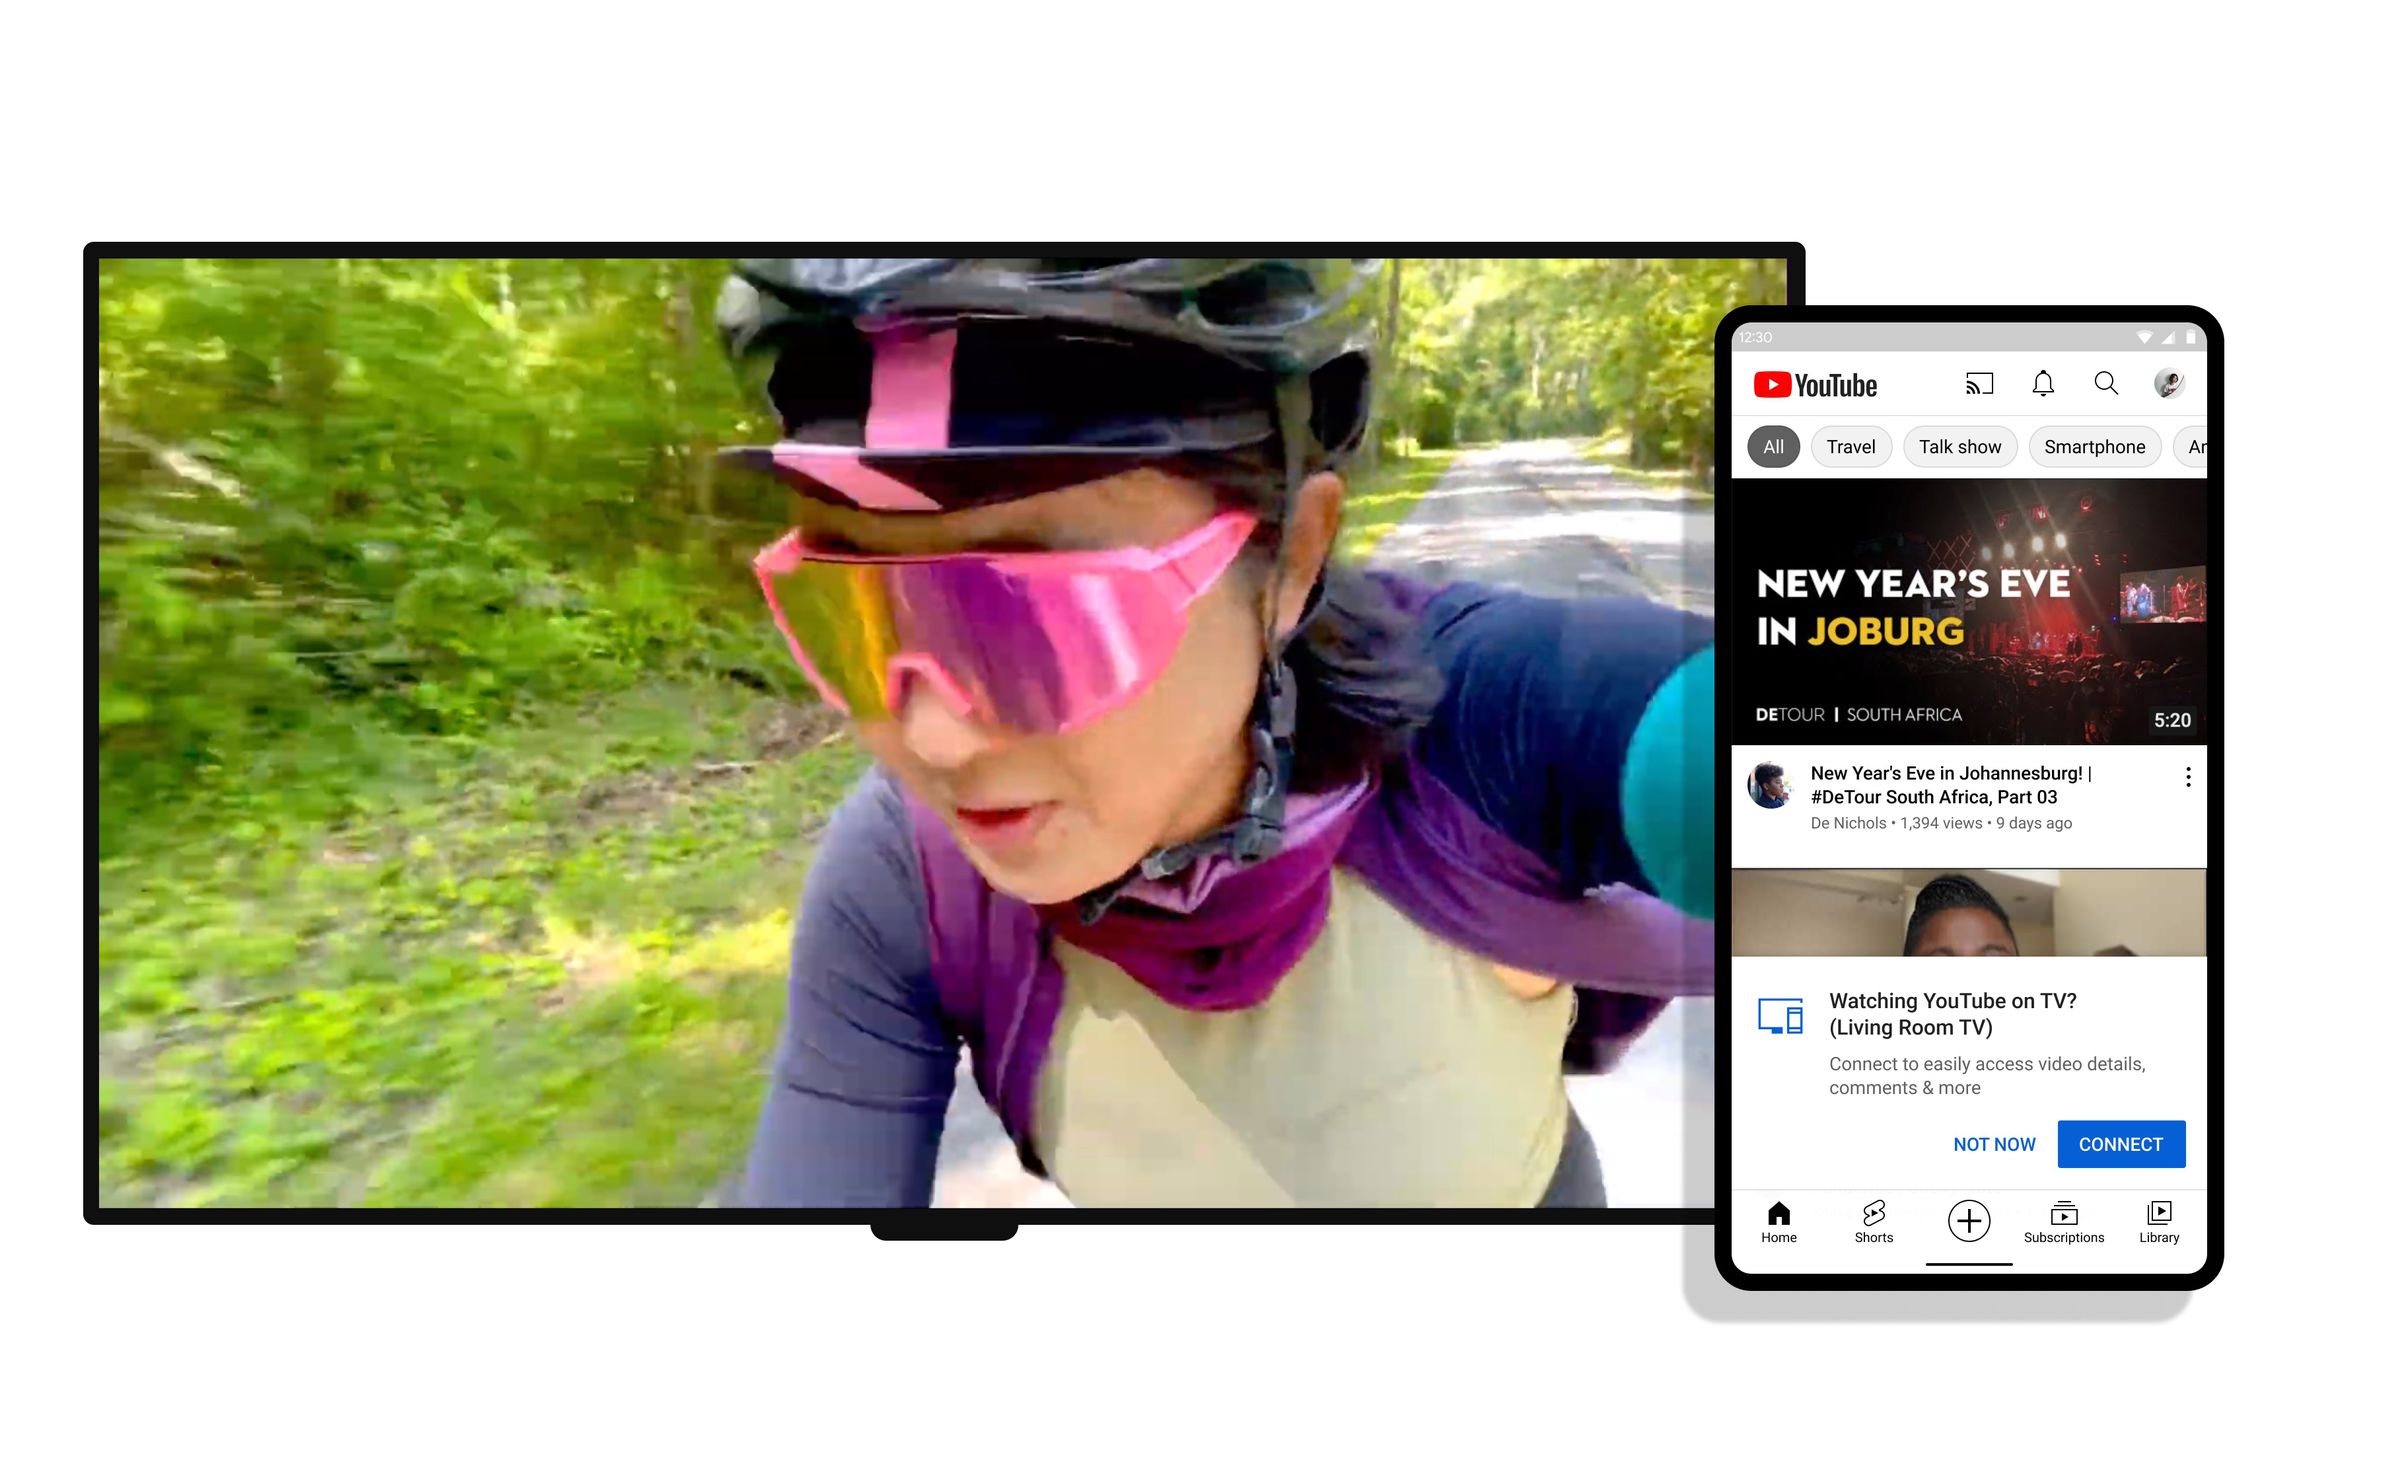 YouTube’s new Connect feature should work on most TVs, with no setup or software.